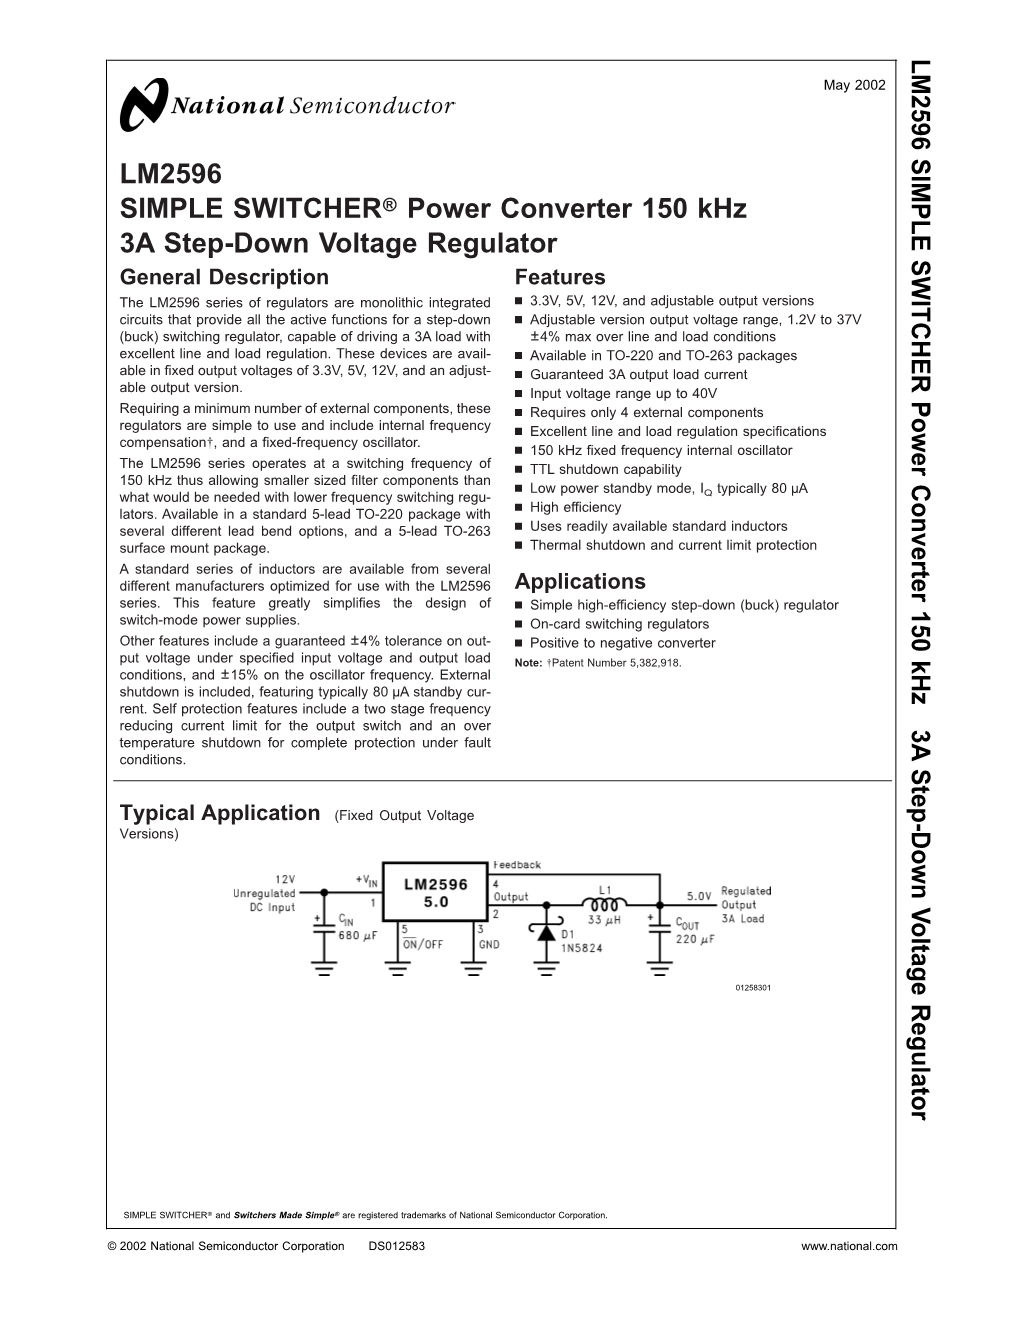 LM2596 SIMPLE SWITCHER Power Converter 150 Khz 3A Step-Down V